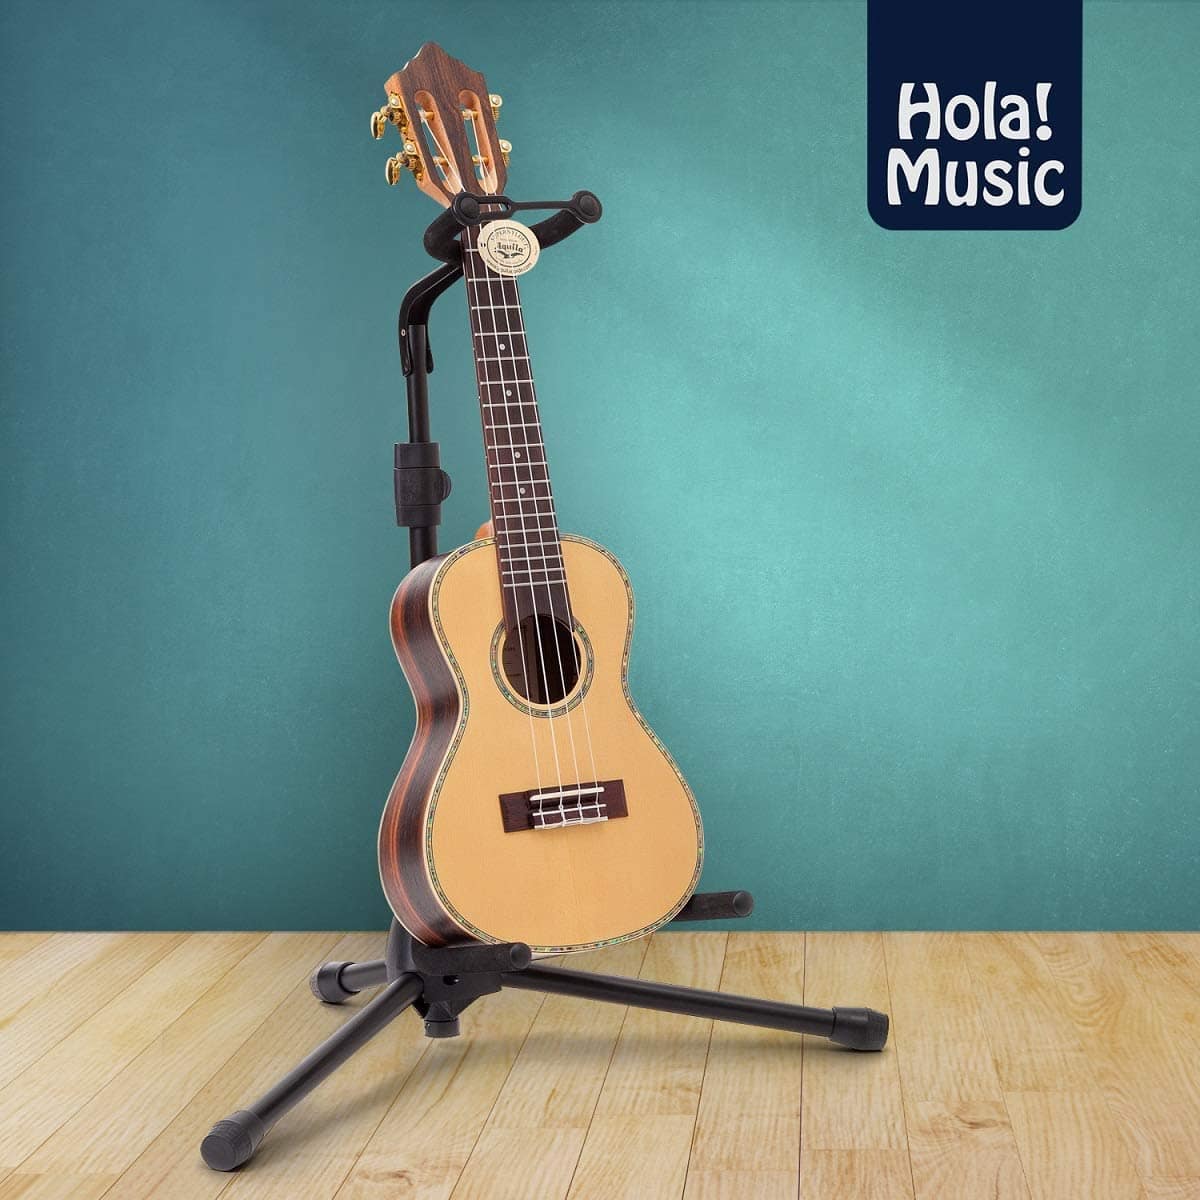 Pack of 2 – Universal Guitar Stand by Hola! Music – Fits Acoustic, Classical, Electric, Bass Guitars, Mandolins, Banjos, Ukuleles and Other Stringed Instruments 14